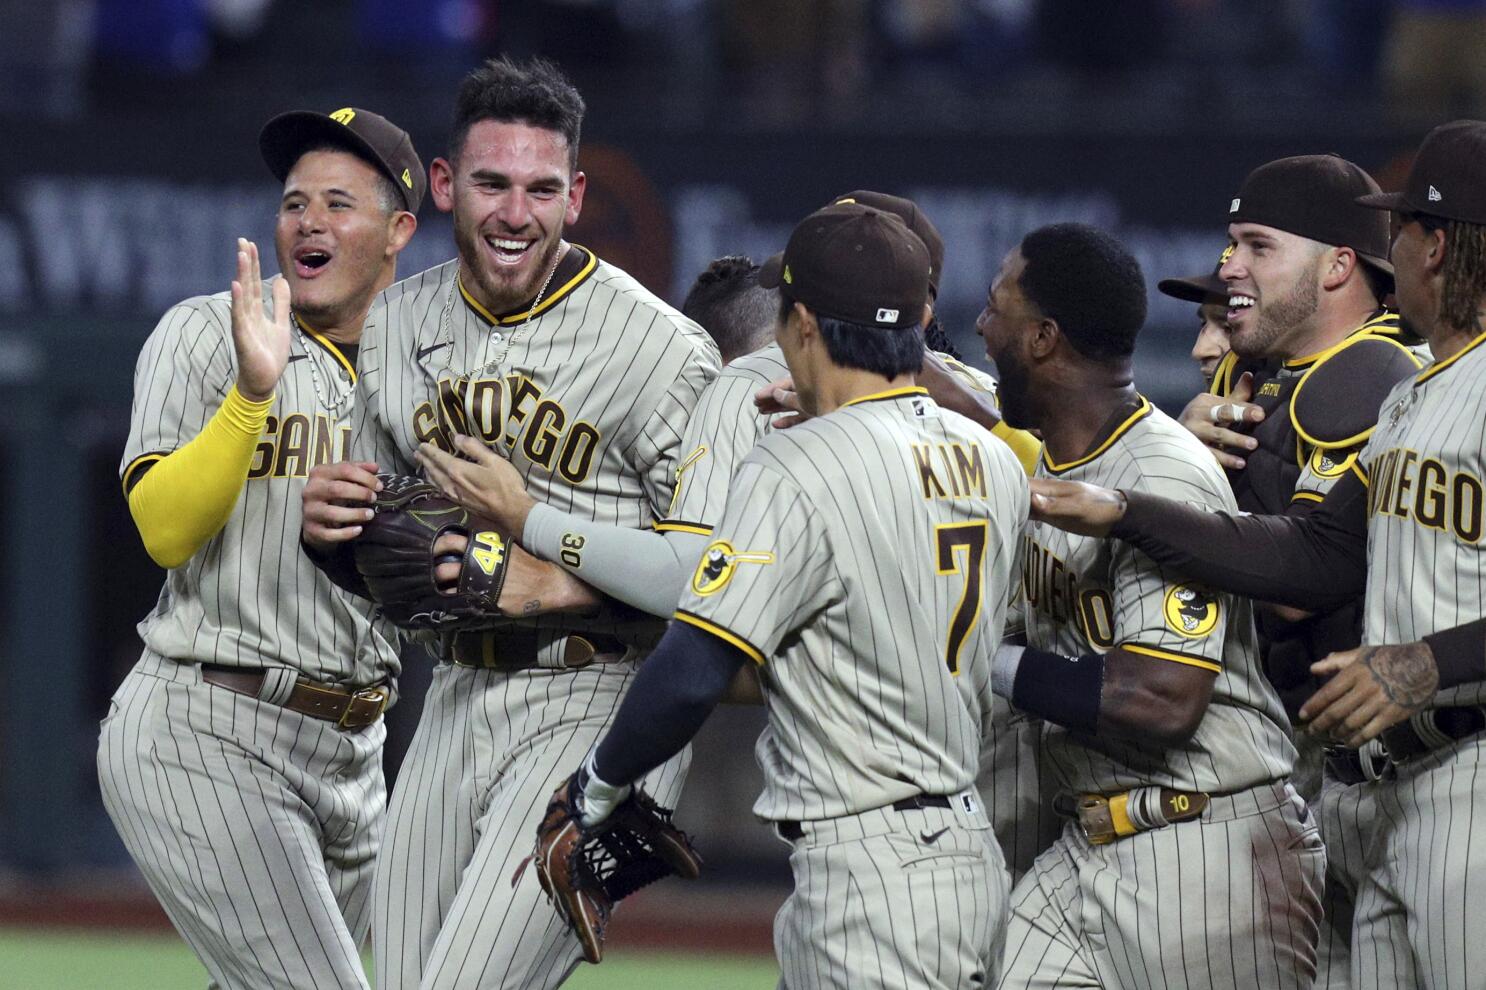 Joe Musgrove Throws First No-Hitter in Padres History - The New York Times